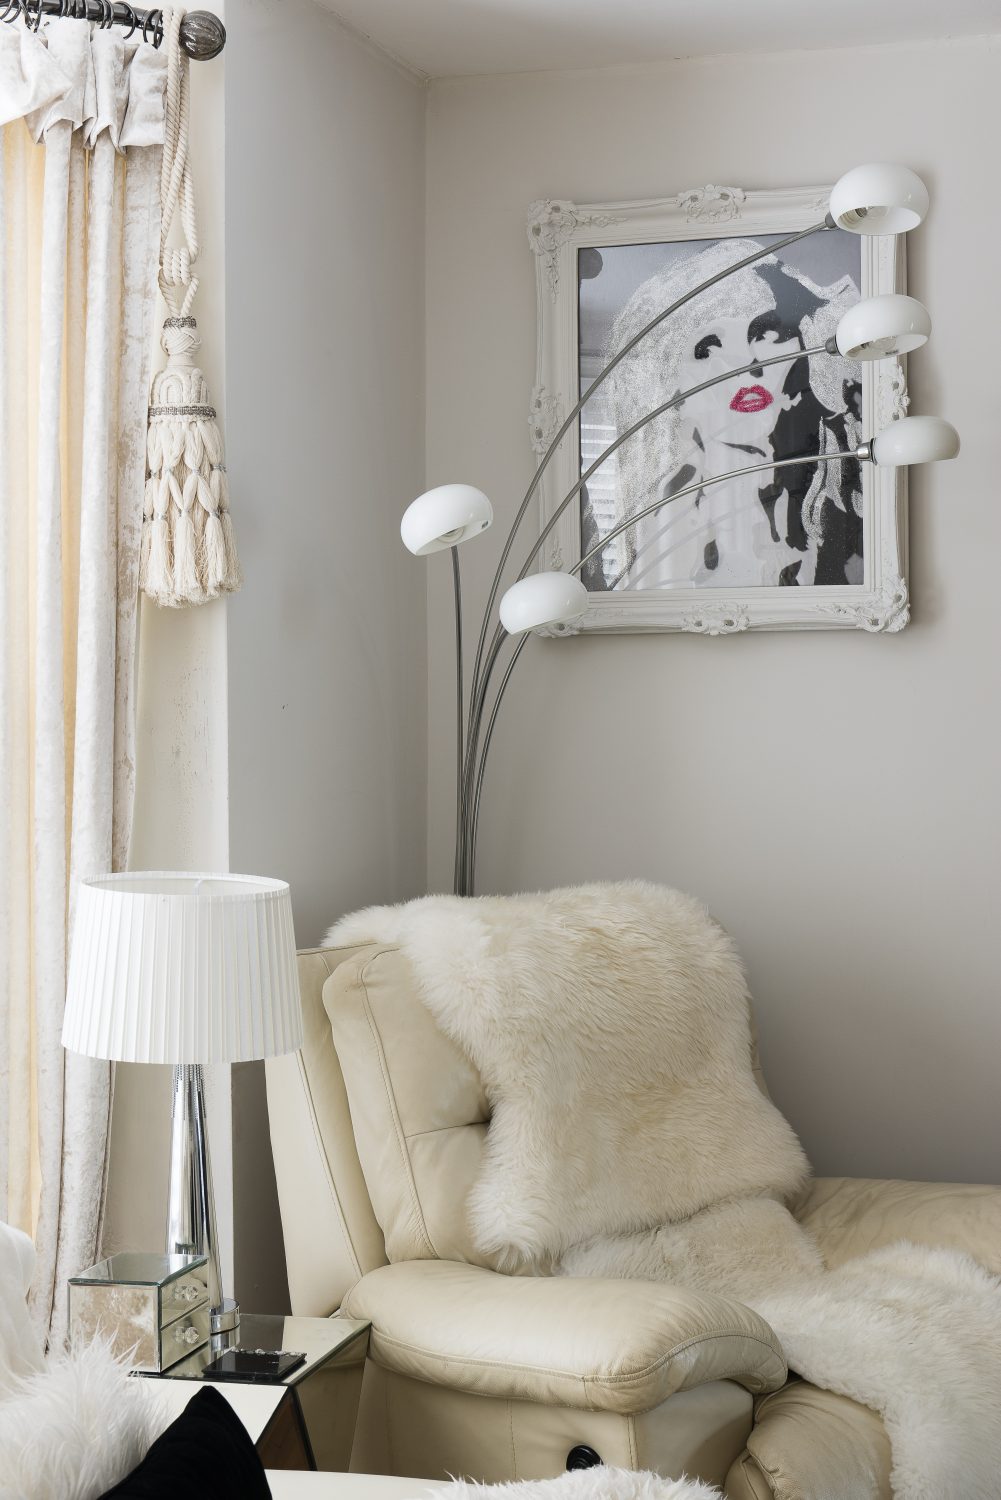 The standard lamp was from Woodcocks in Battle. Sarah glitter-enhanced and framed the Blondie print, which has a matching Elvis opposite